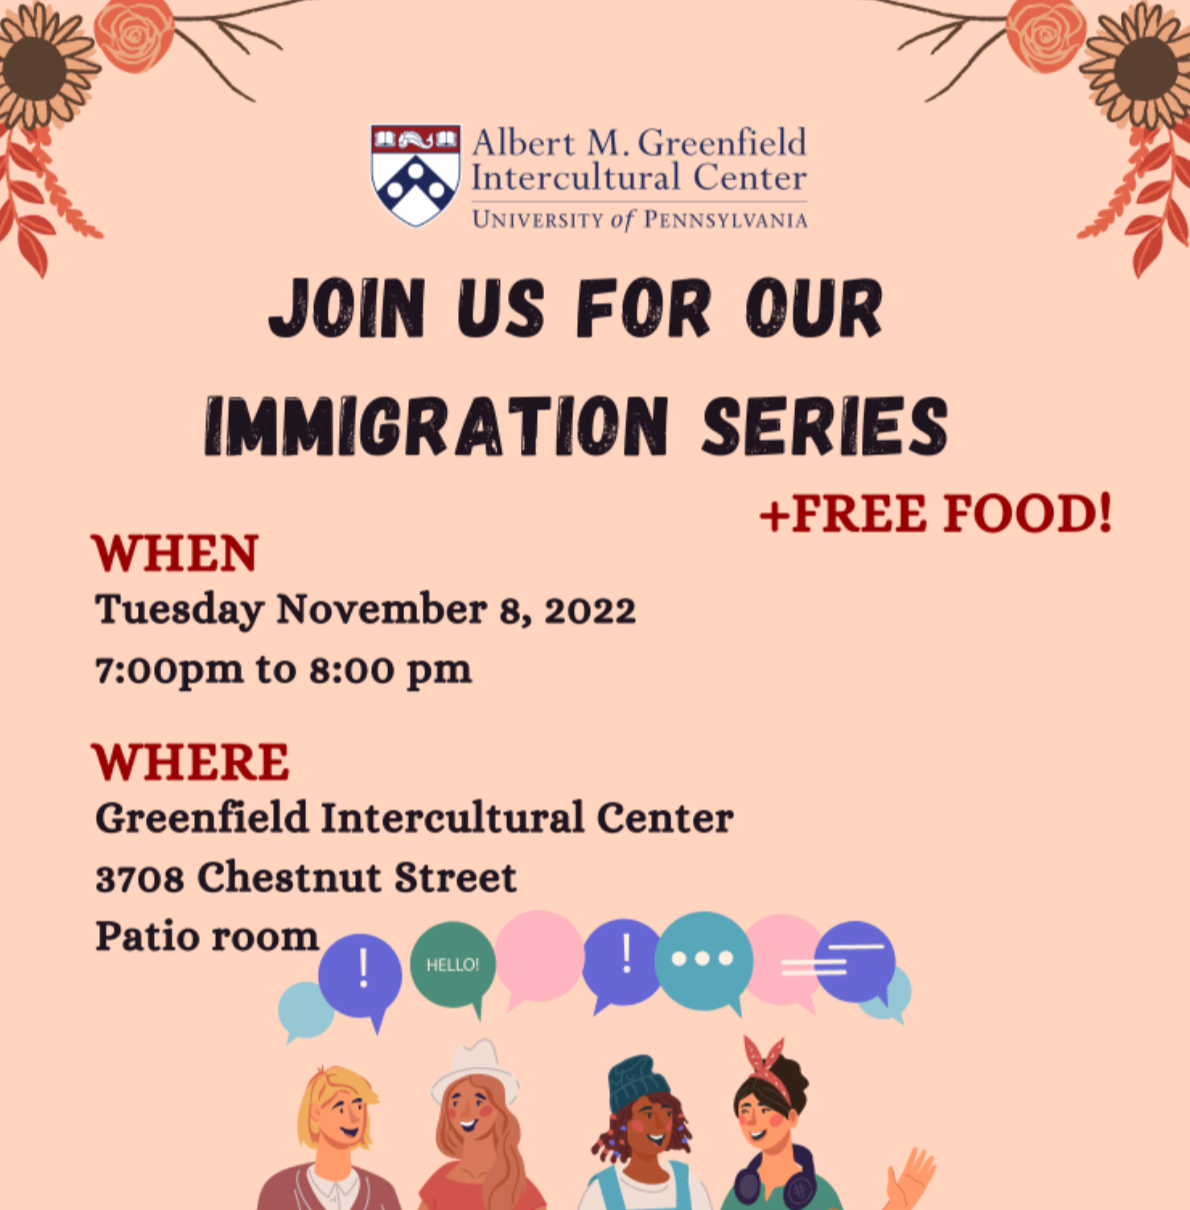 Immigration Series Flyer